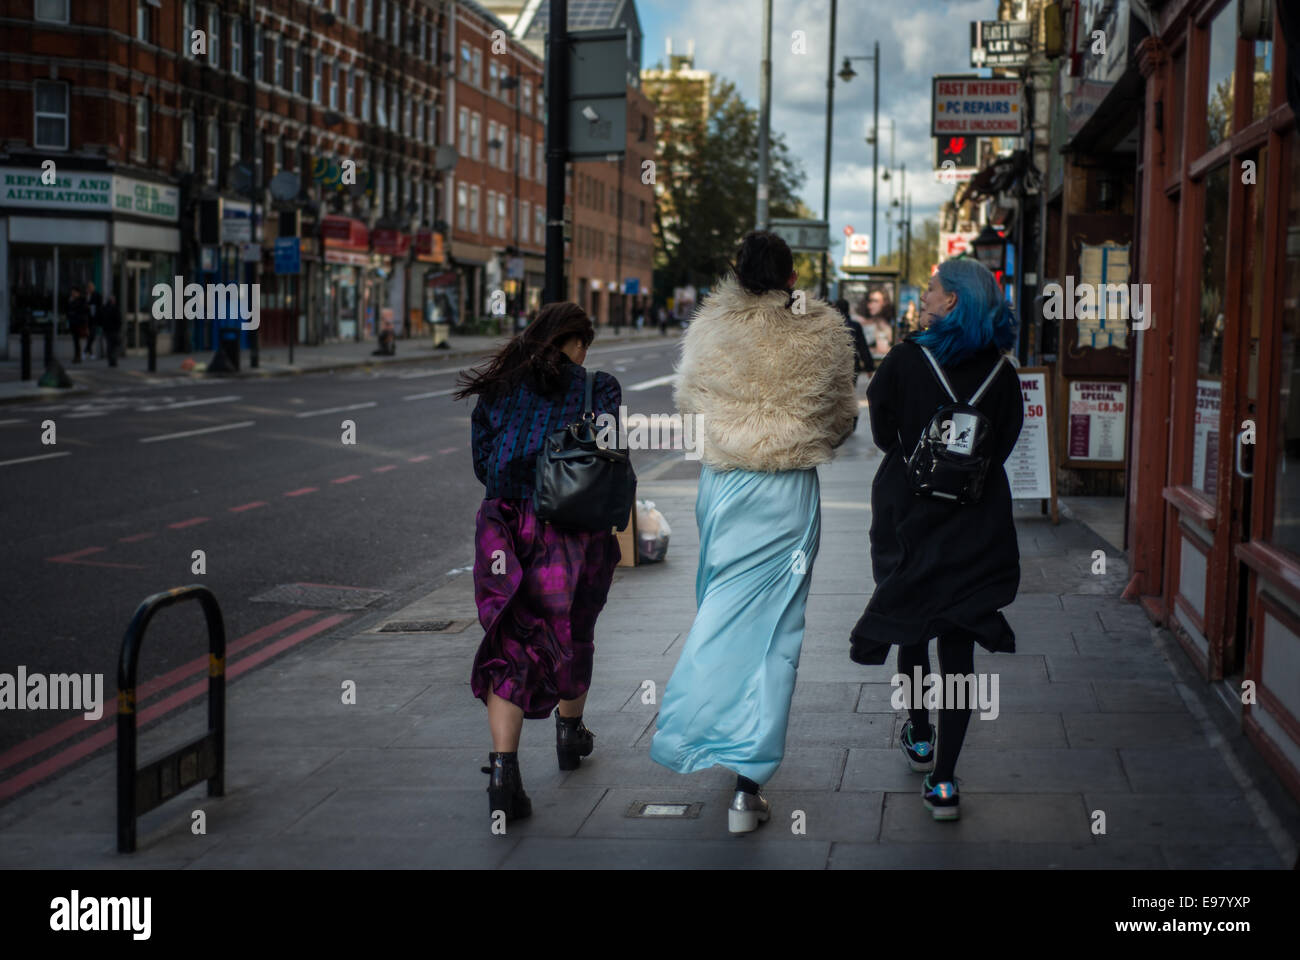 London, UK - 21 October 2014: Three young women dressed in eccentric ...